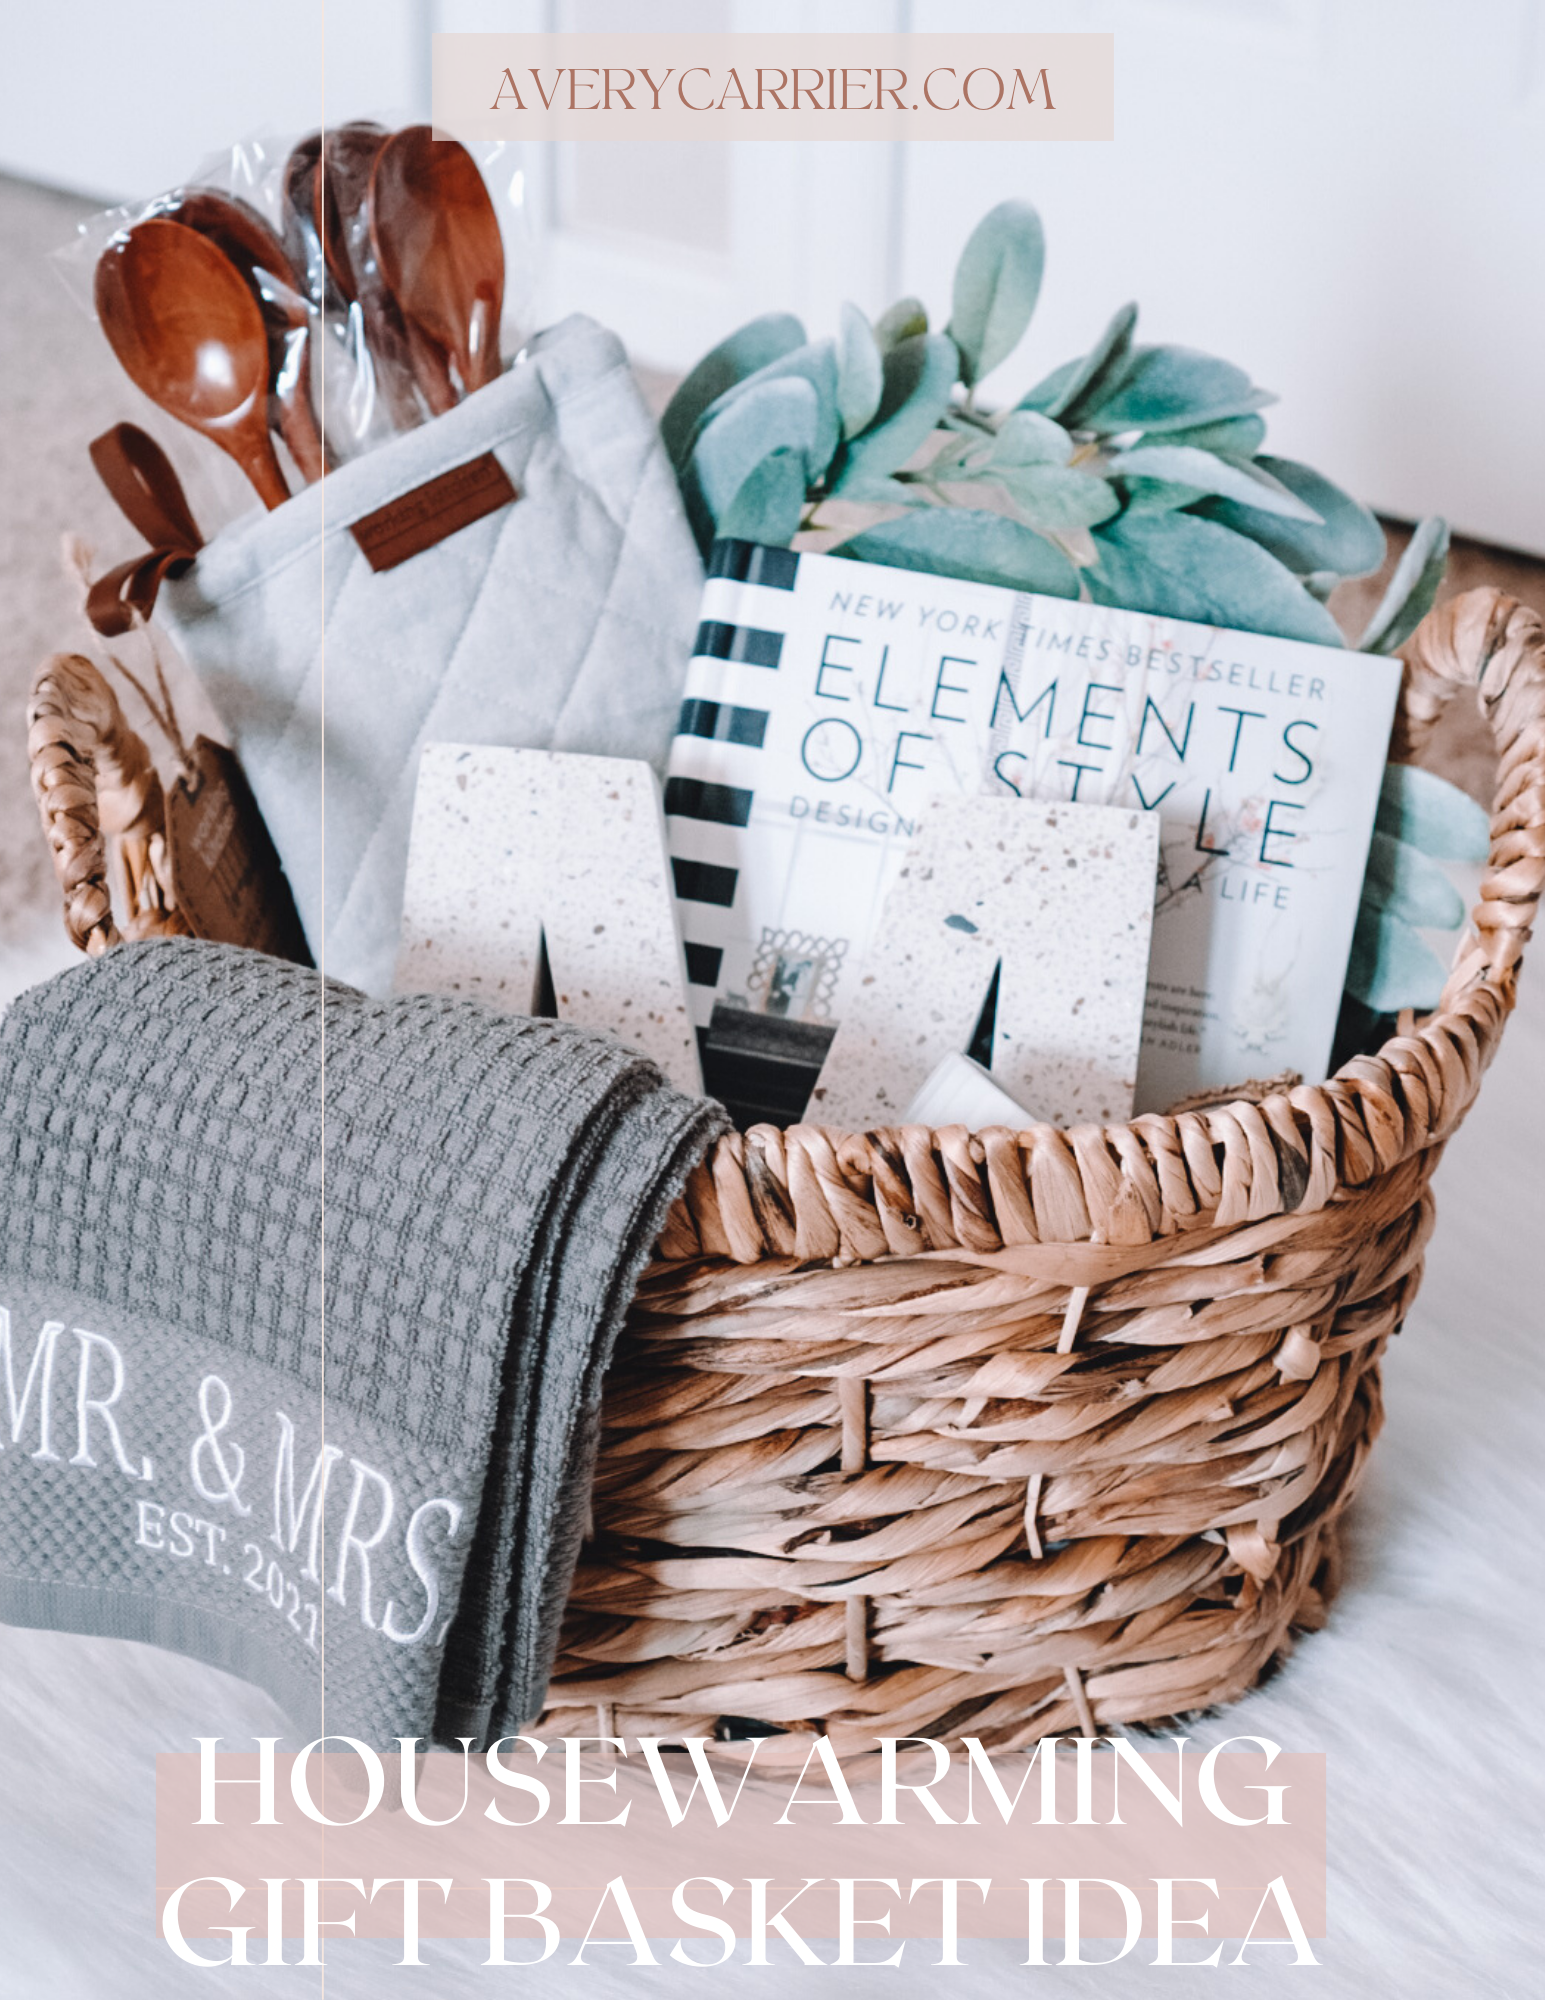 Housewarming Gift Basket Idea for Newly Weds — Avery Carrier